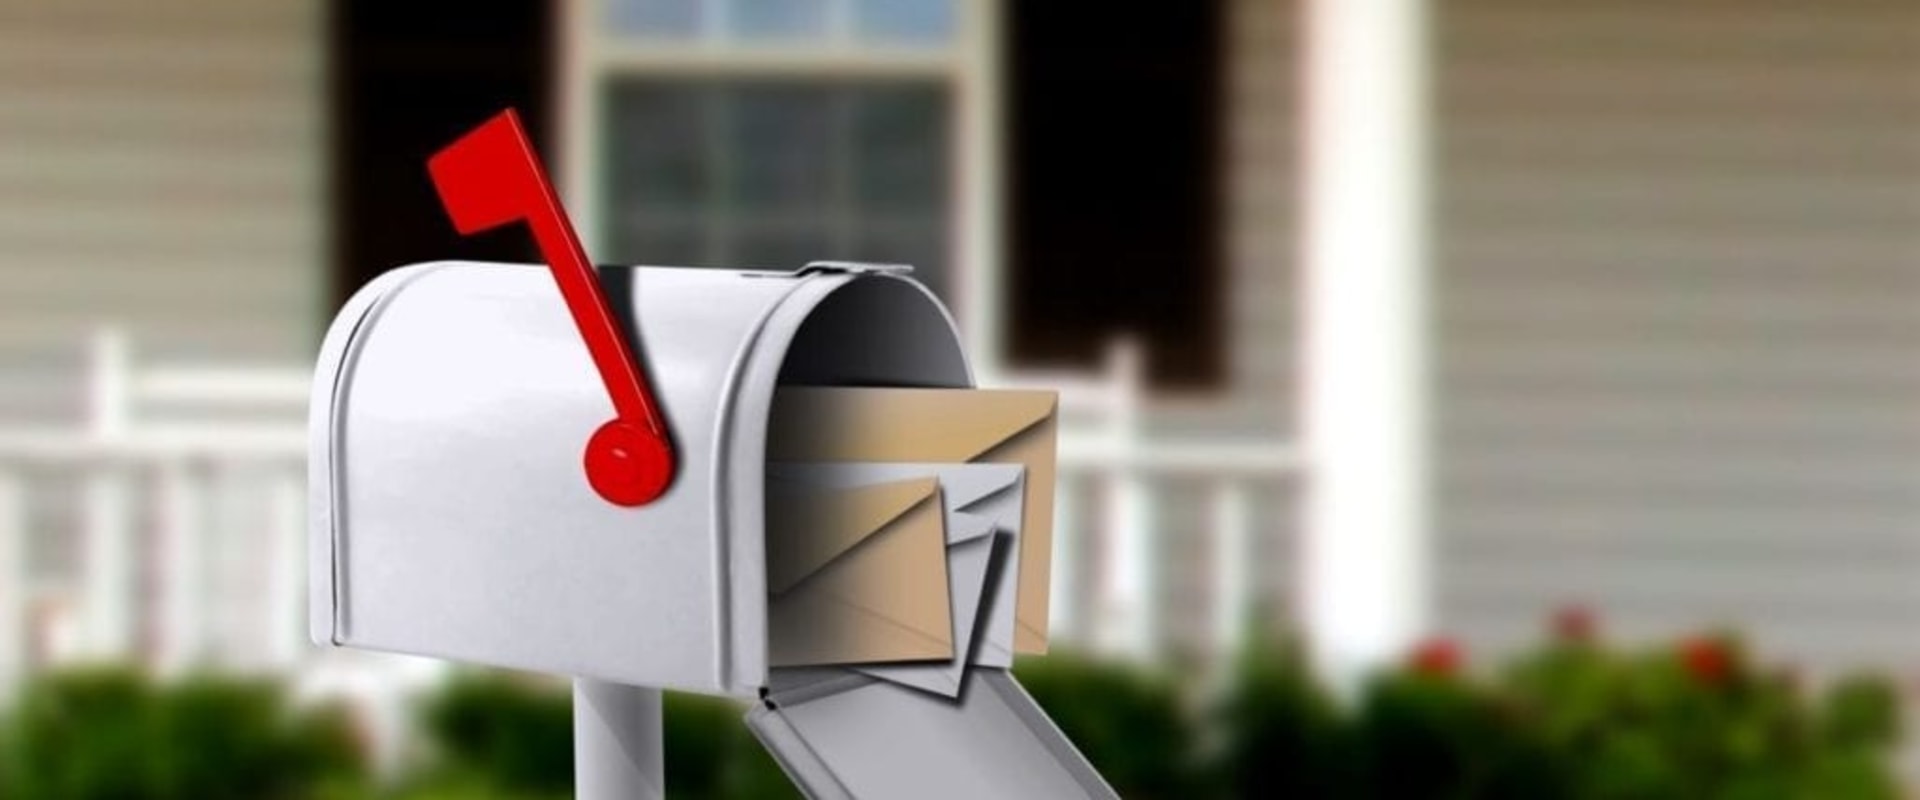 Can you use a po box address for google my business?